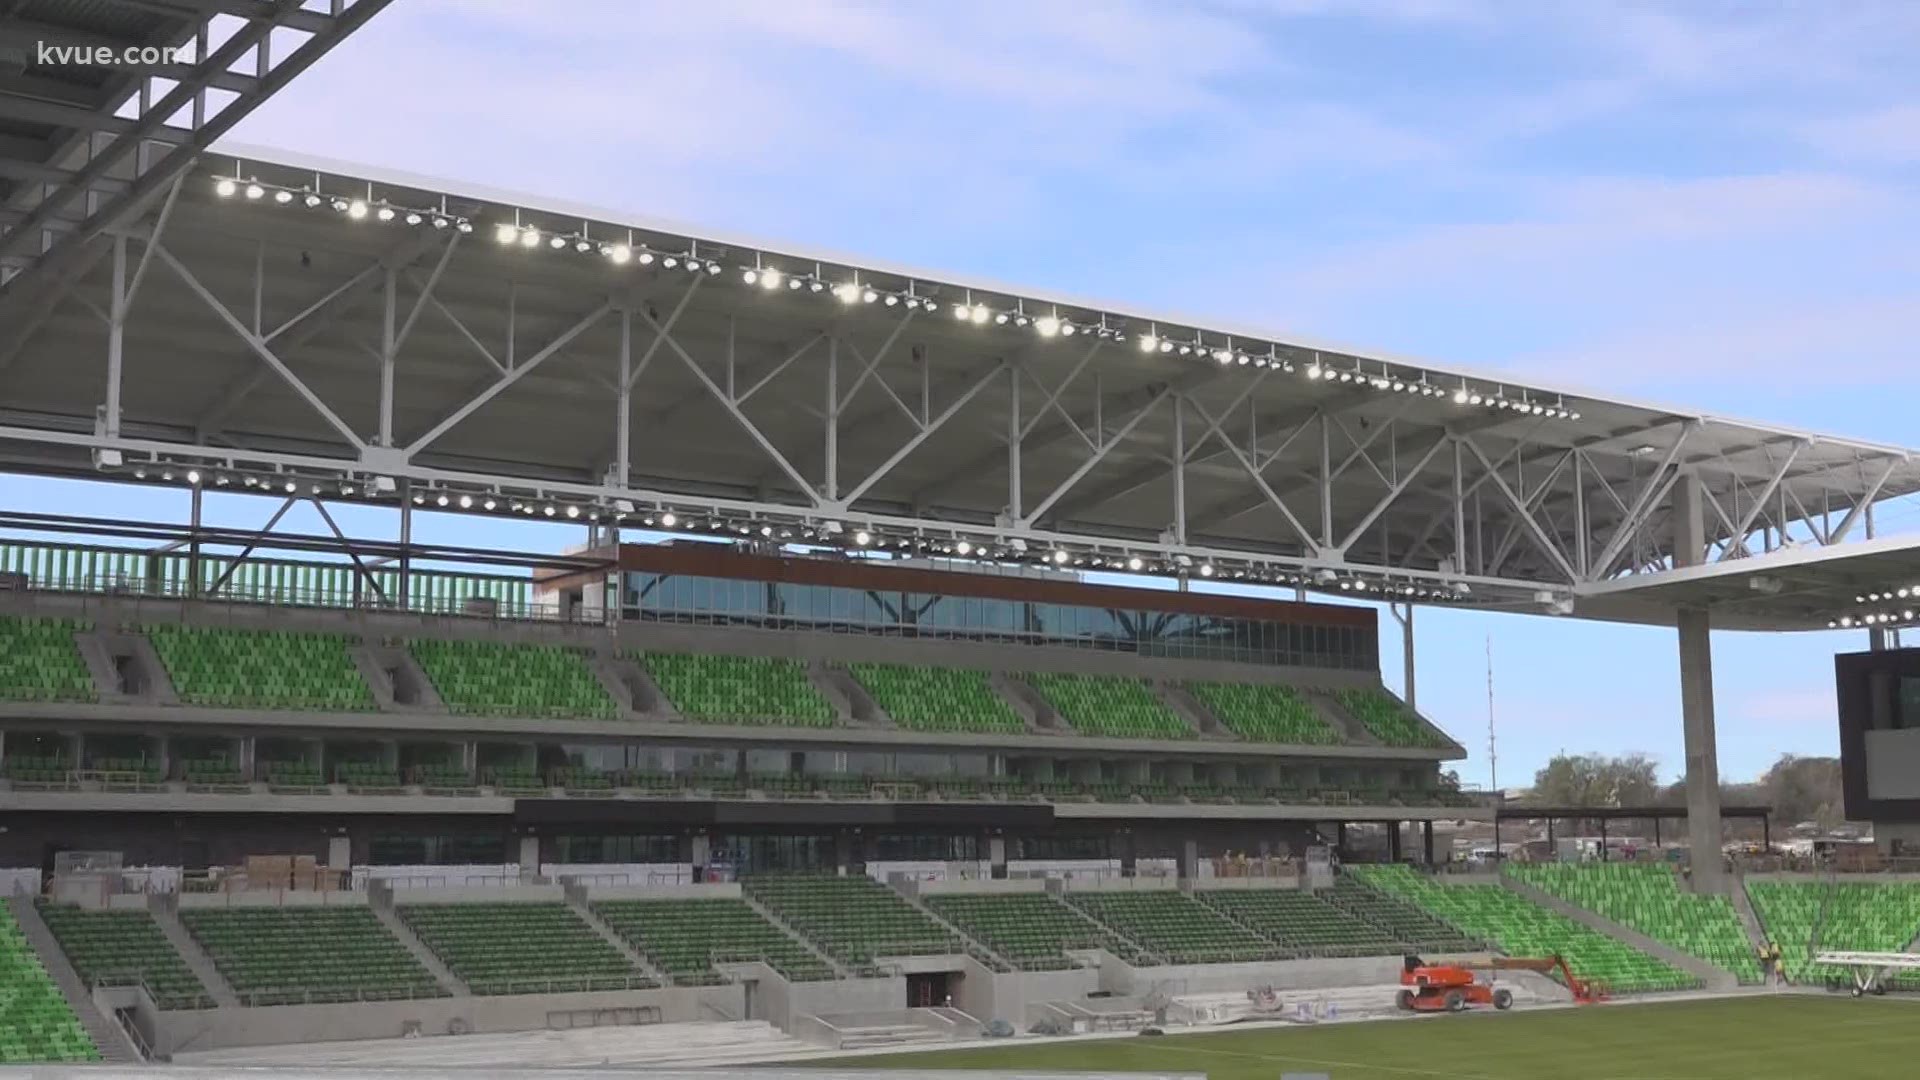 Austin FC announced the name of its stadium Monday: Q2 Stadium. And MLS announced the day the season will start. But when will a home game be played in Austin?